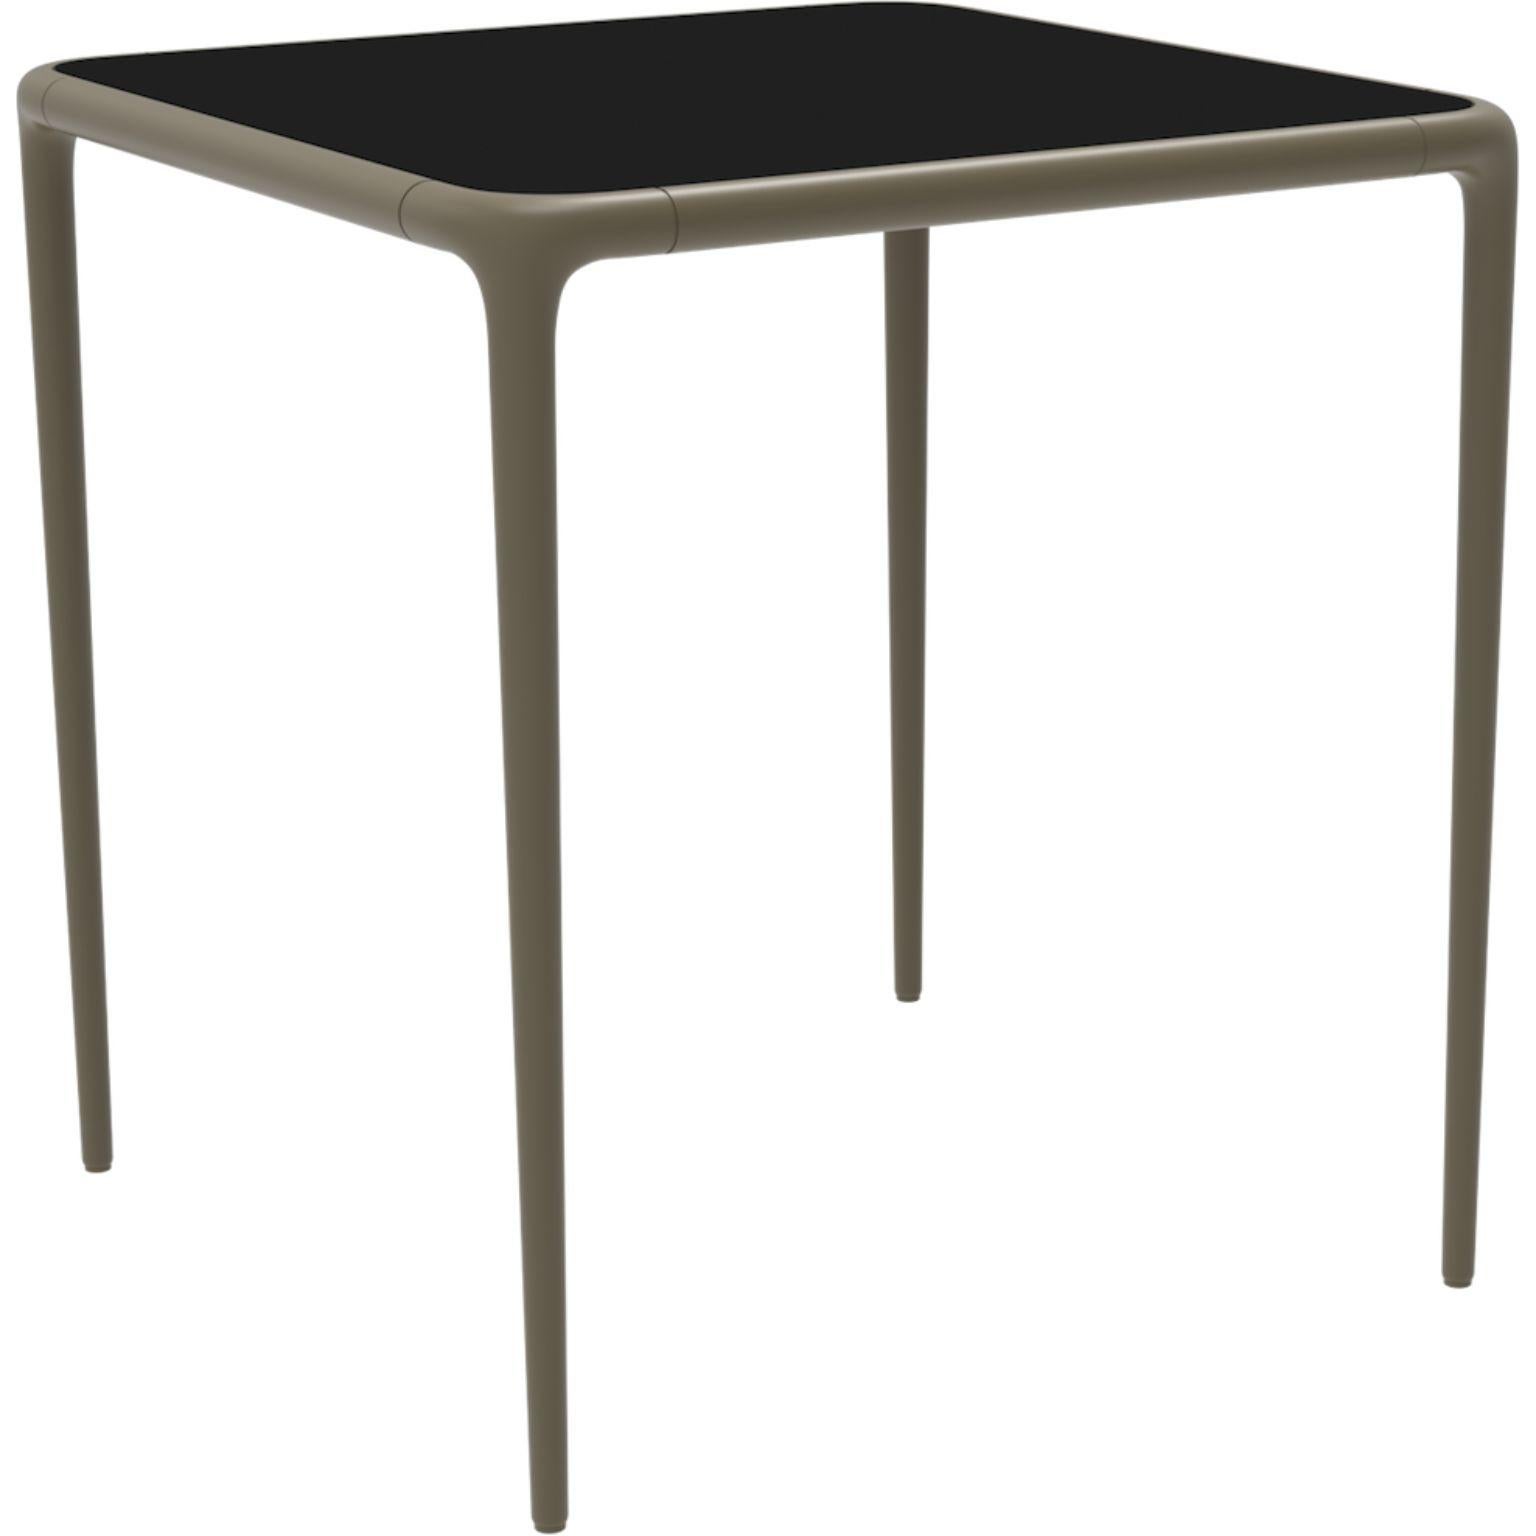 Xaloc bronze glass top table 70 by Mowee.
Dimensions: D70 x W70 x H74 cm.
Material: Aluminum, tinted tempered glass top.
Also available in different aluminum colors and finishes (HPL Black Edge or Neolith).

Xaloc synthesizes the lines of